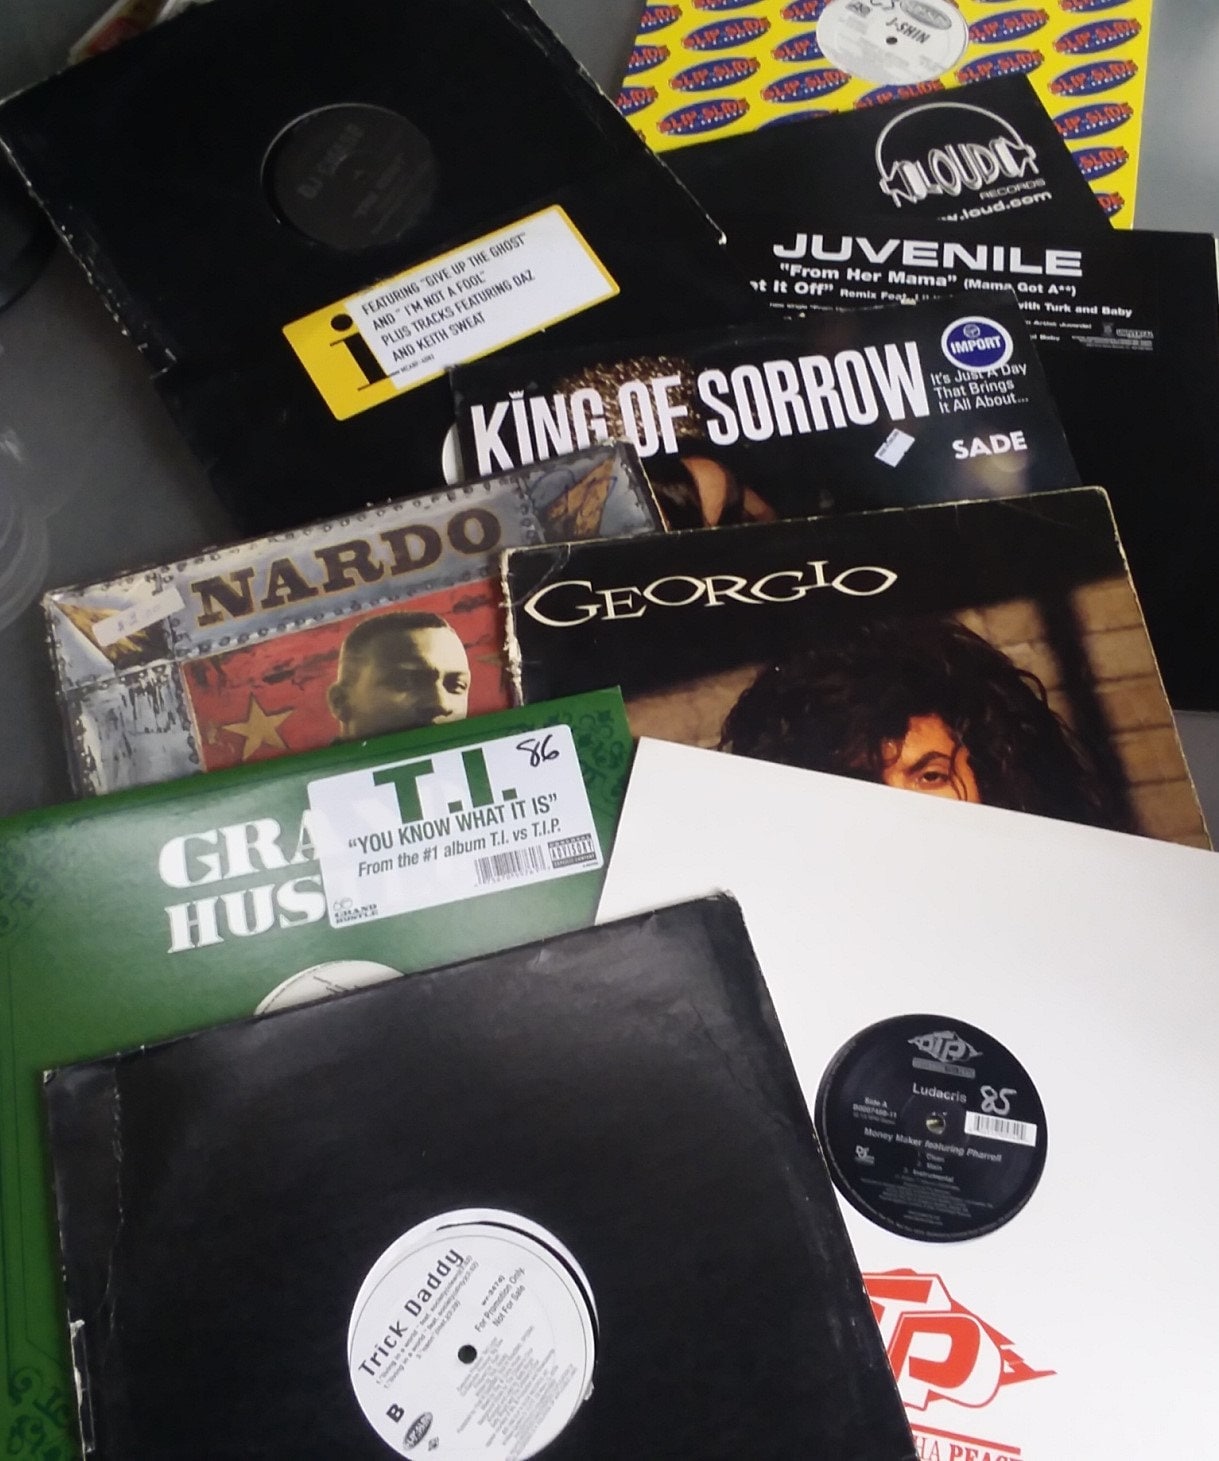 Lot Of 10 Used Vinyl Records Good Condition Cheap!!! Random Selection.